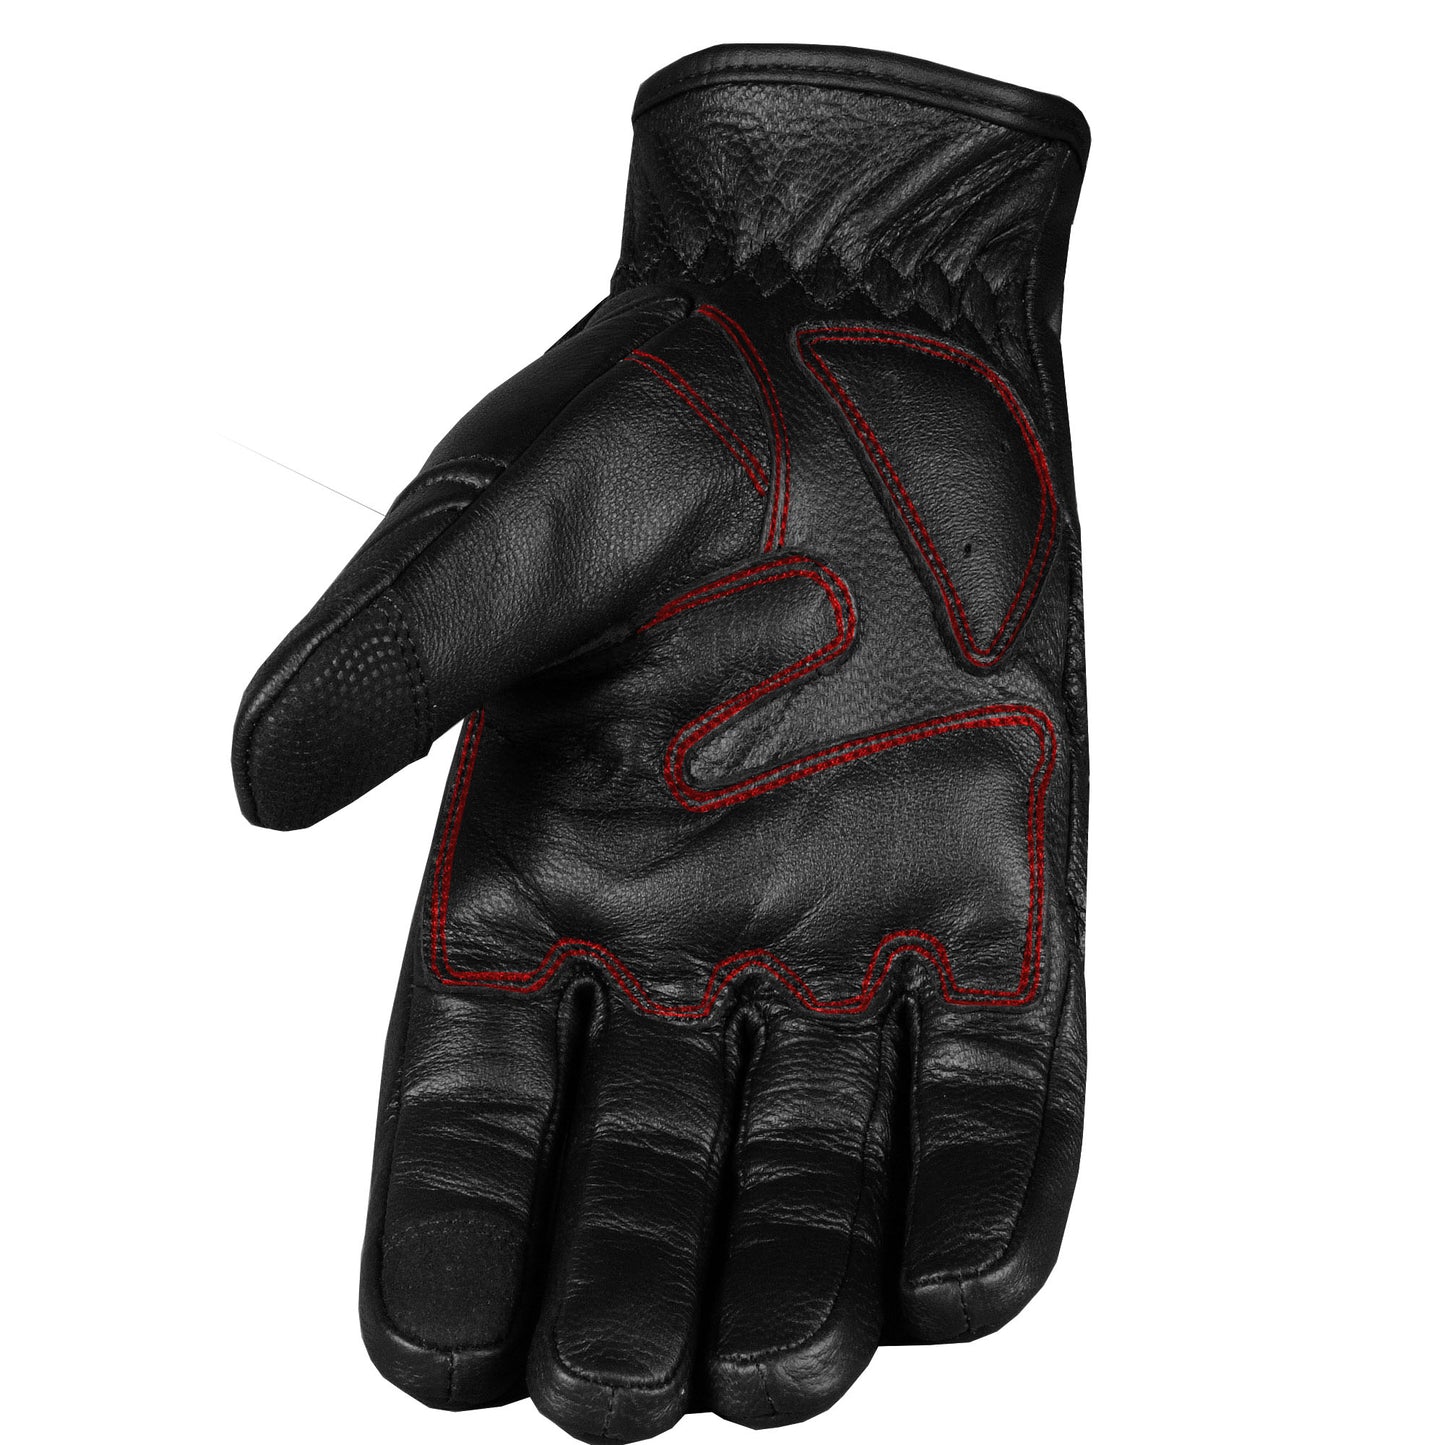 New Vintage Mens Leather Cruiser Protective Motorcycle Riding Racing Gloves BlackRed